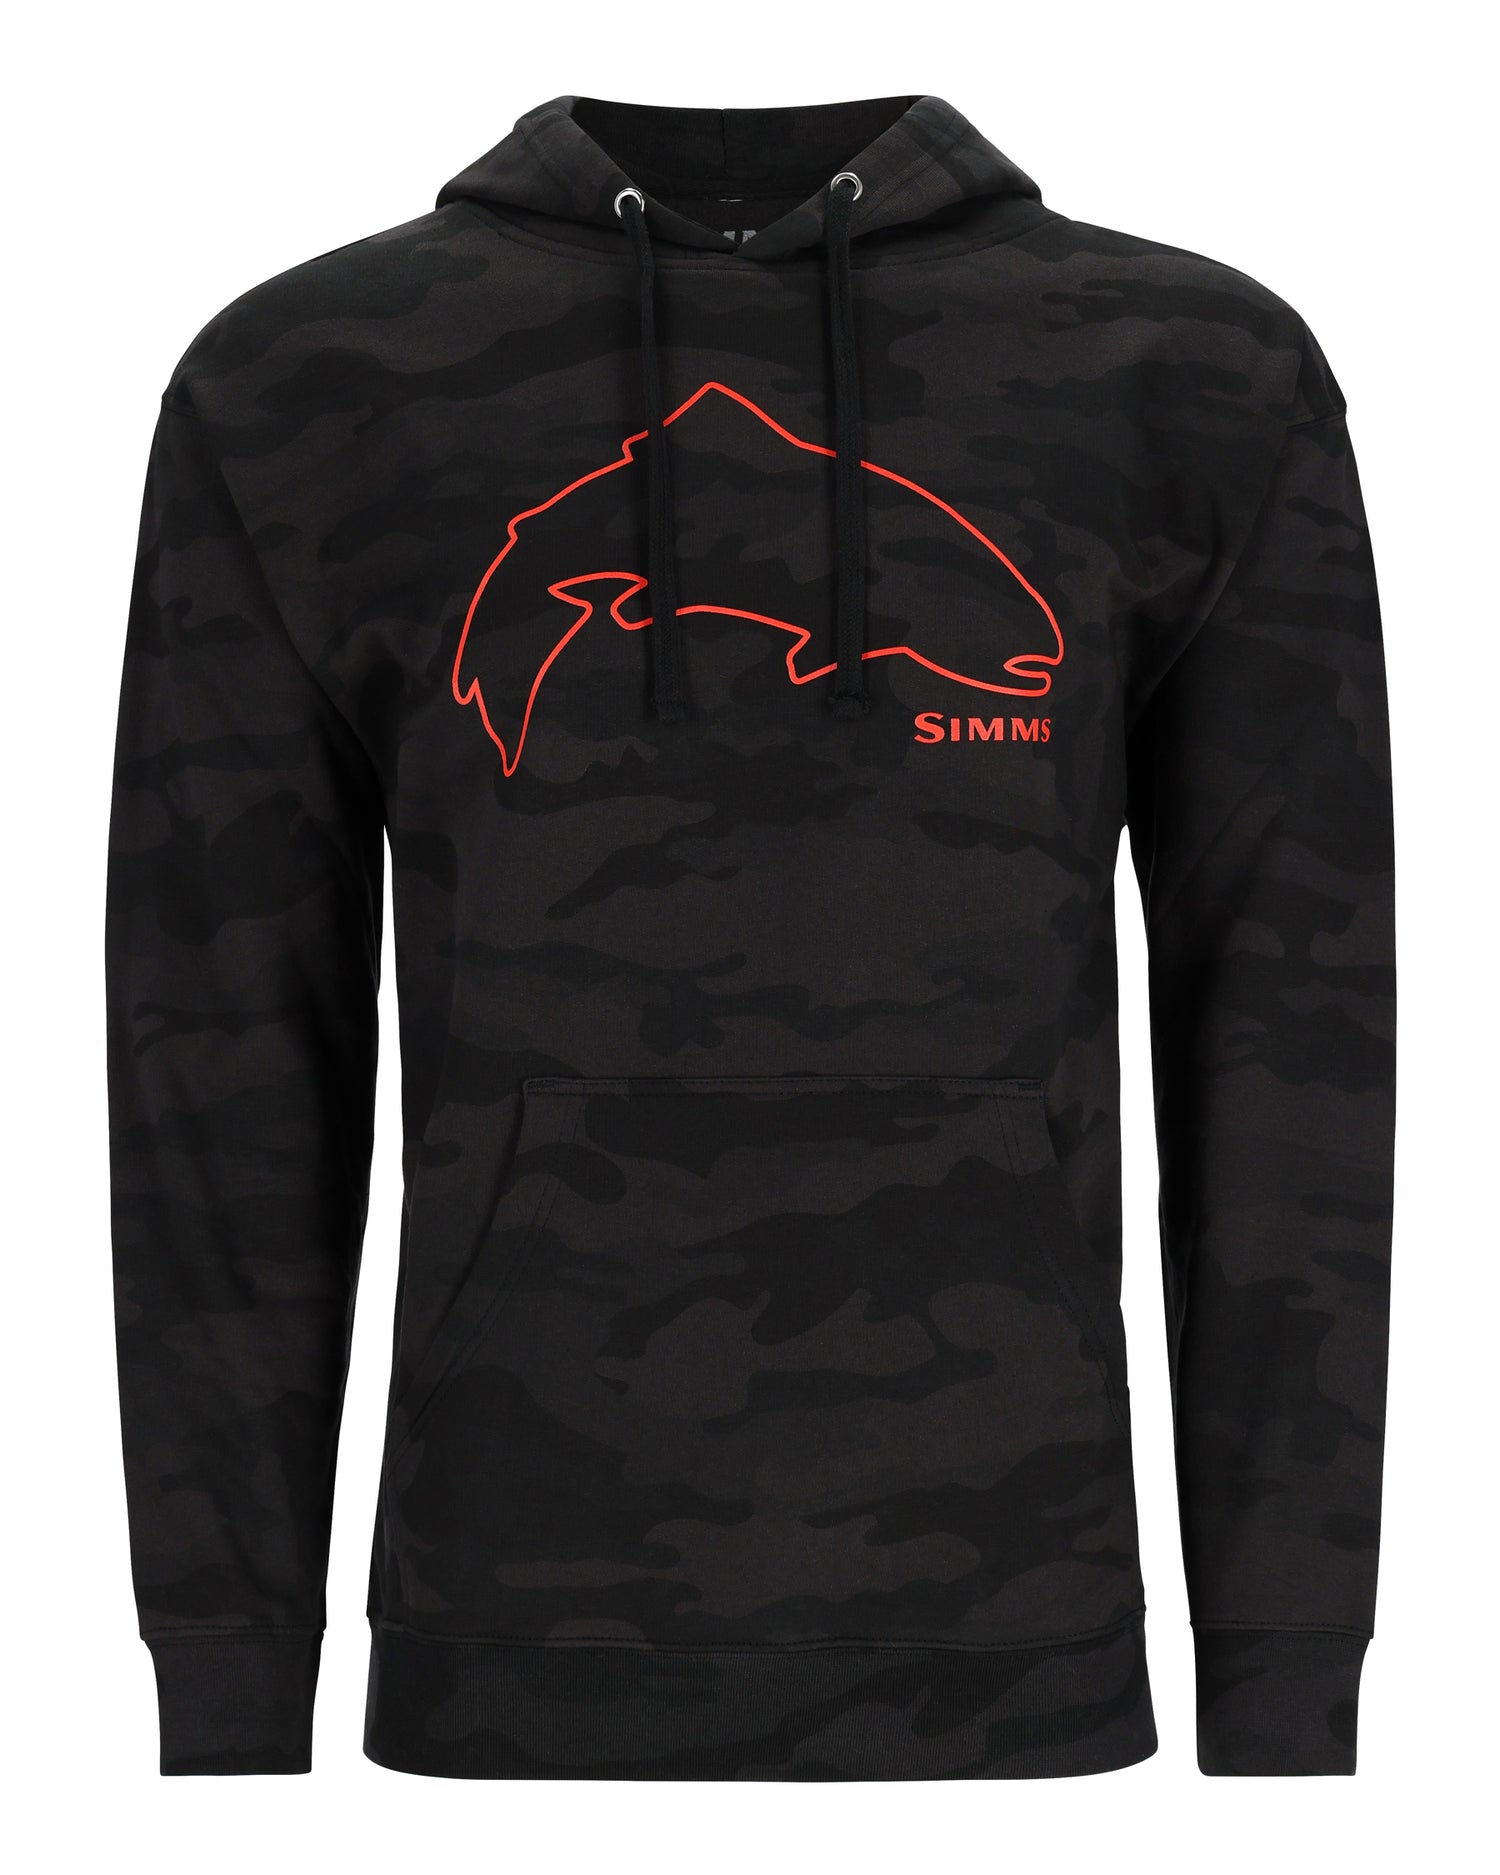 13784-180-trout-outline-hoody-Mannequin-s23-front